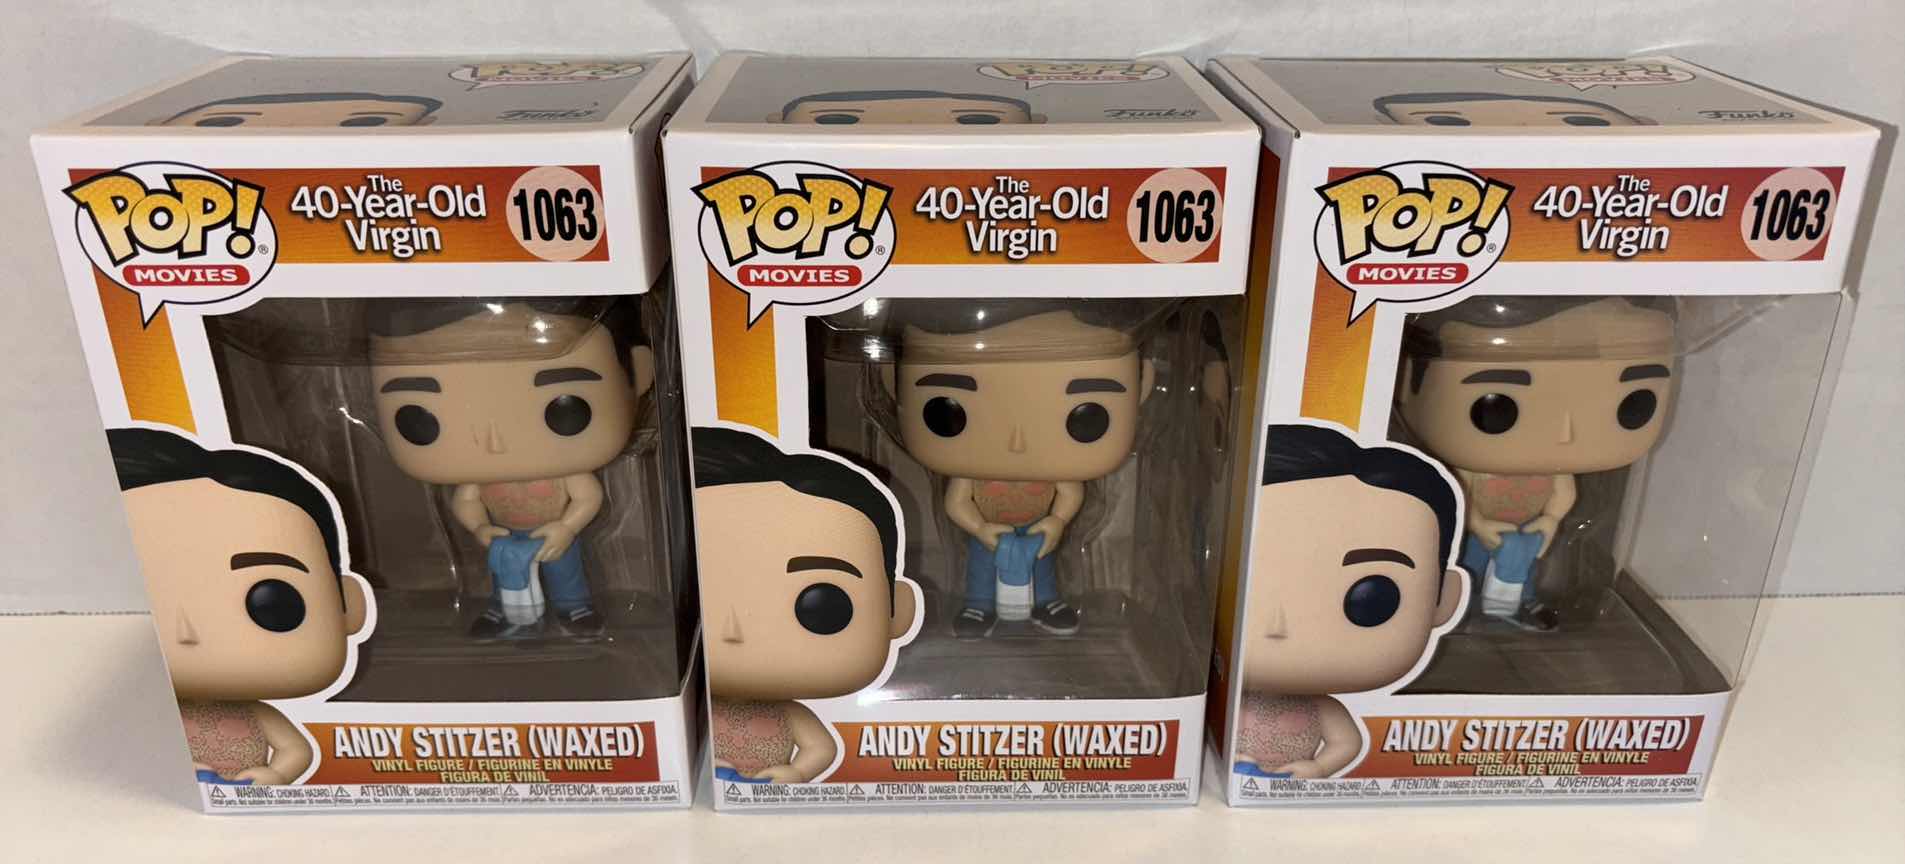 Photo 1 of NEW FUNKO POP! MOVIES 3-PACK VINYL FIGURES, THE 40-YEAR-OLD VIRGIN #1063 ANDY STITZER (WAXED)